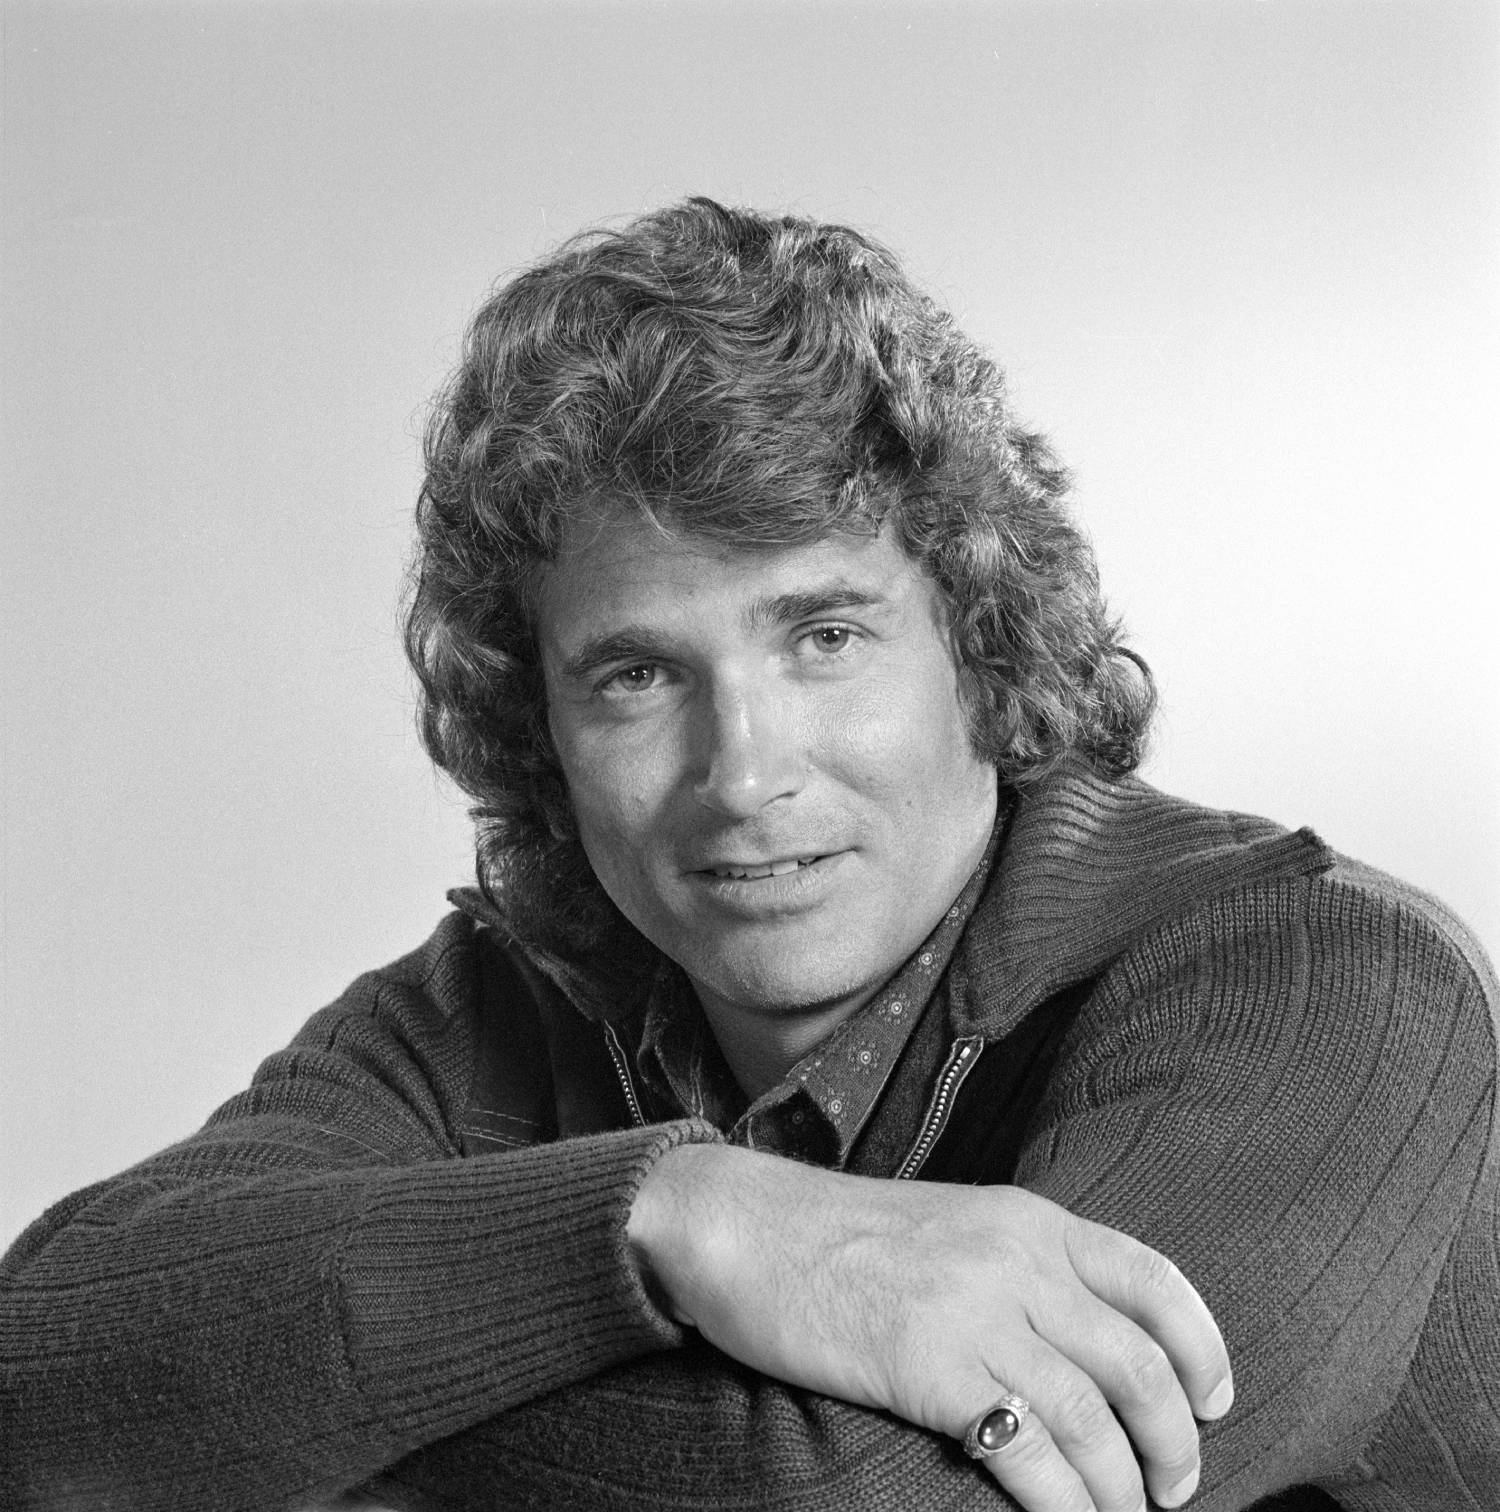 LOS ANGELES - MARCH 26: Michael Landon photographed for "American Jr. Miss." Image dated March 26, 1974.